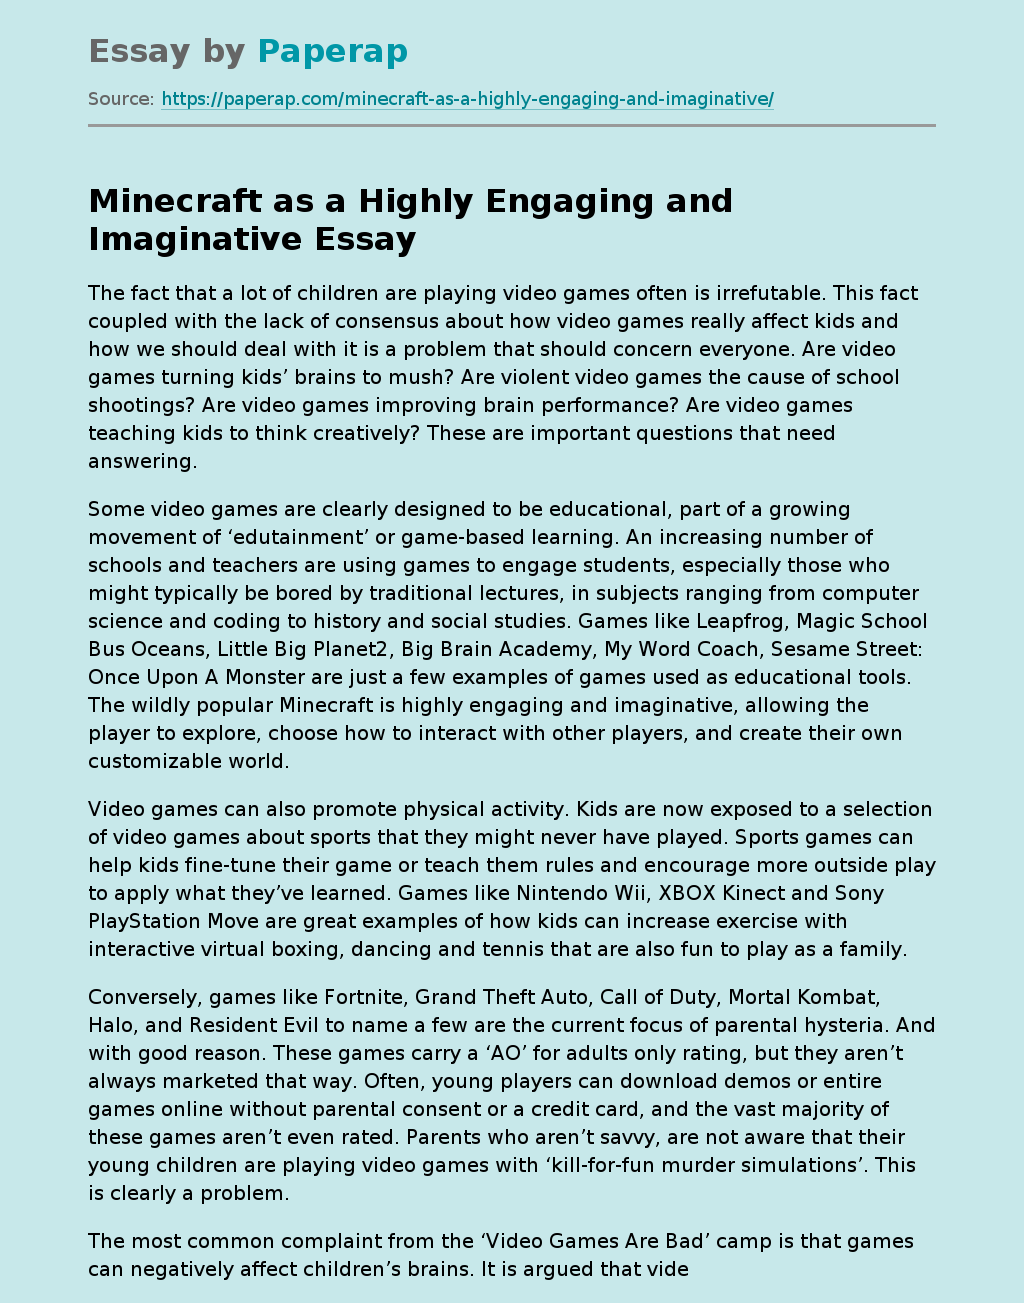 Minecraft as a Highly Engaging and Imaginative